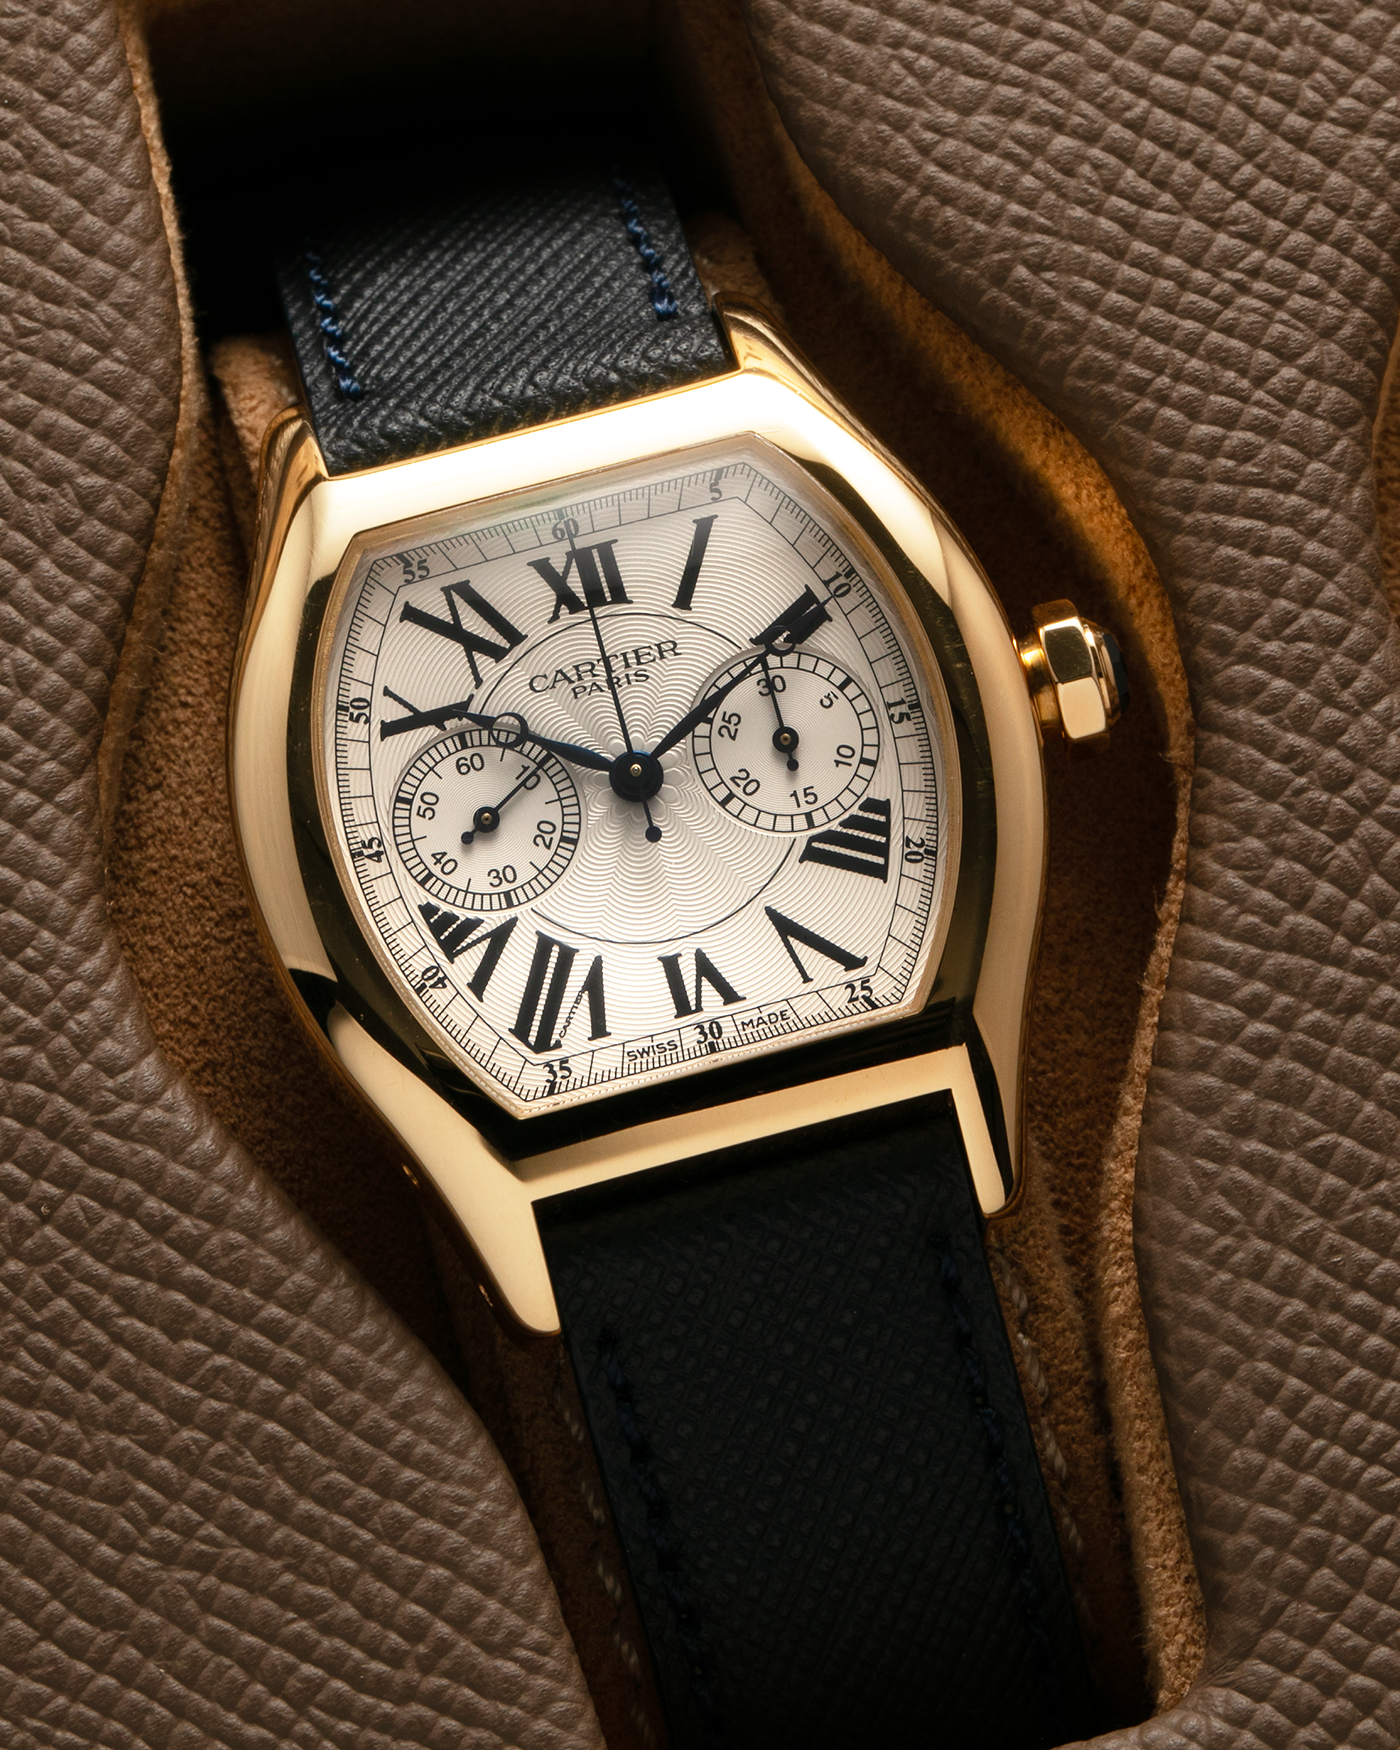 Brand: Cartier Year: 2000’s Model: Collection Privée Cartier Paris Tortue Monopoussoir Reference: 2356E Material: 18-carat Yellow Gold Movement: Cartier THA Cal. 045MC, Manual-Winding Case Diameter: 43mm x 35 mm Lug Width: 18mm Strap: Molequin Navy Blue Textured Calf Leather with Signed 18-carat Yellow Gold Deployant Clasp